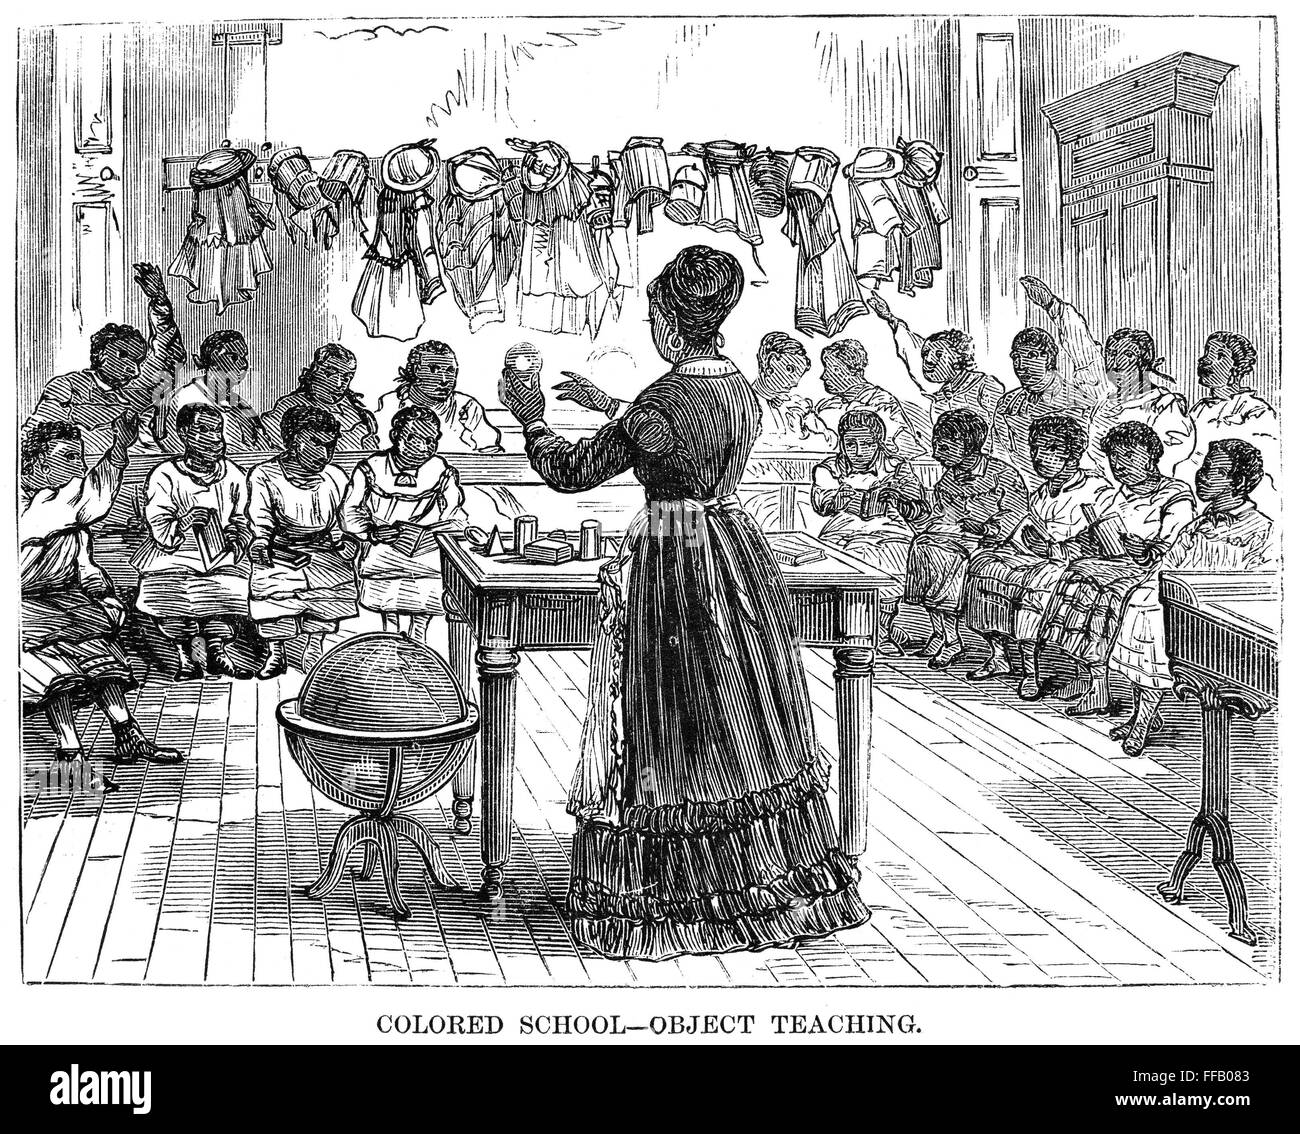 SEGREGATED SCHOOL, 1870. /nA segregated 'colored' school in New York City. Wood engraving, American, 1870. Stock Photo